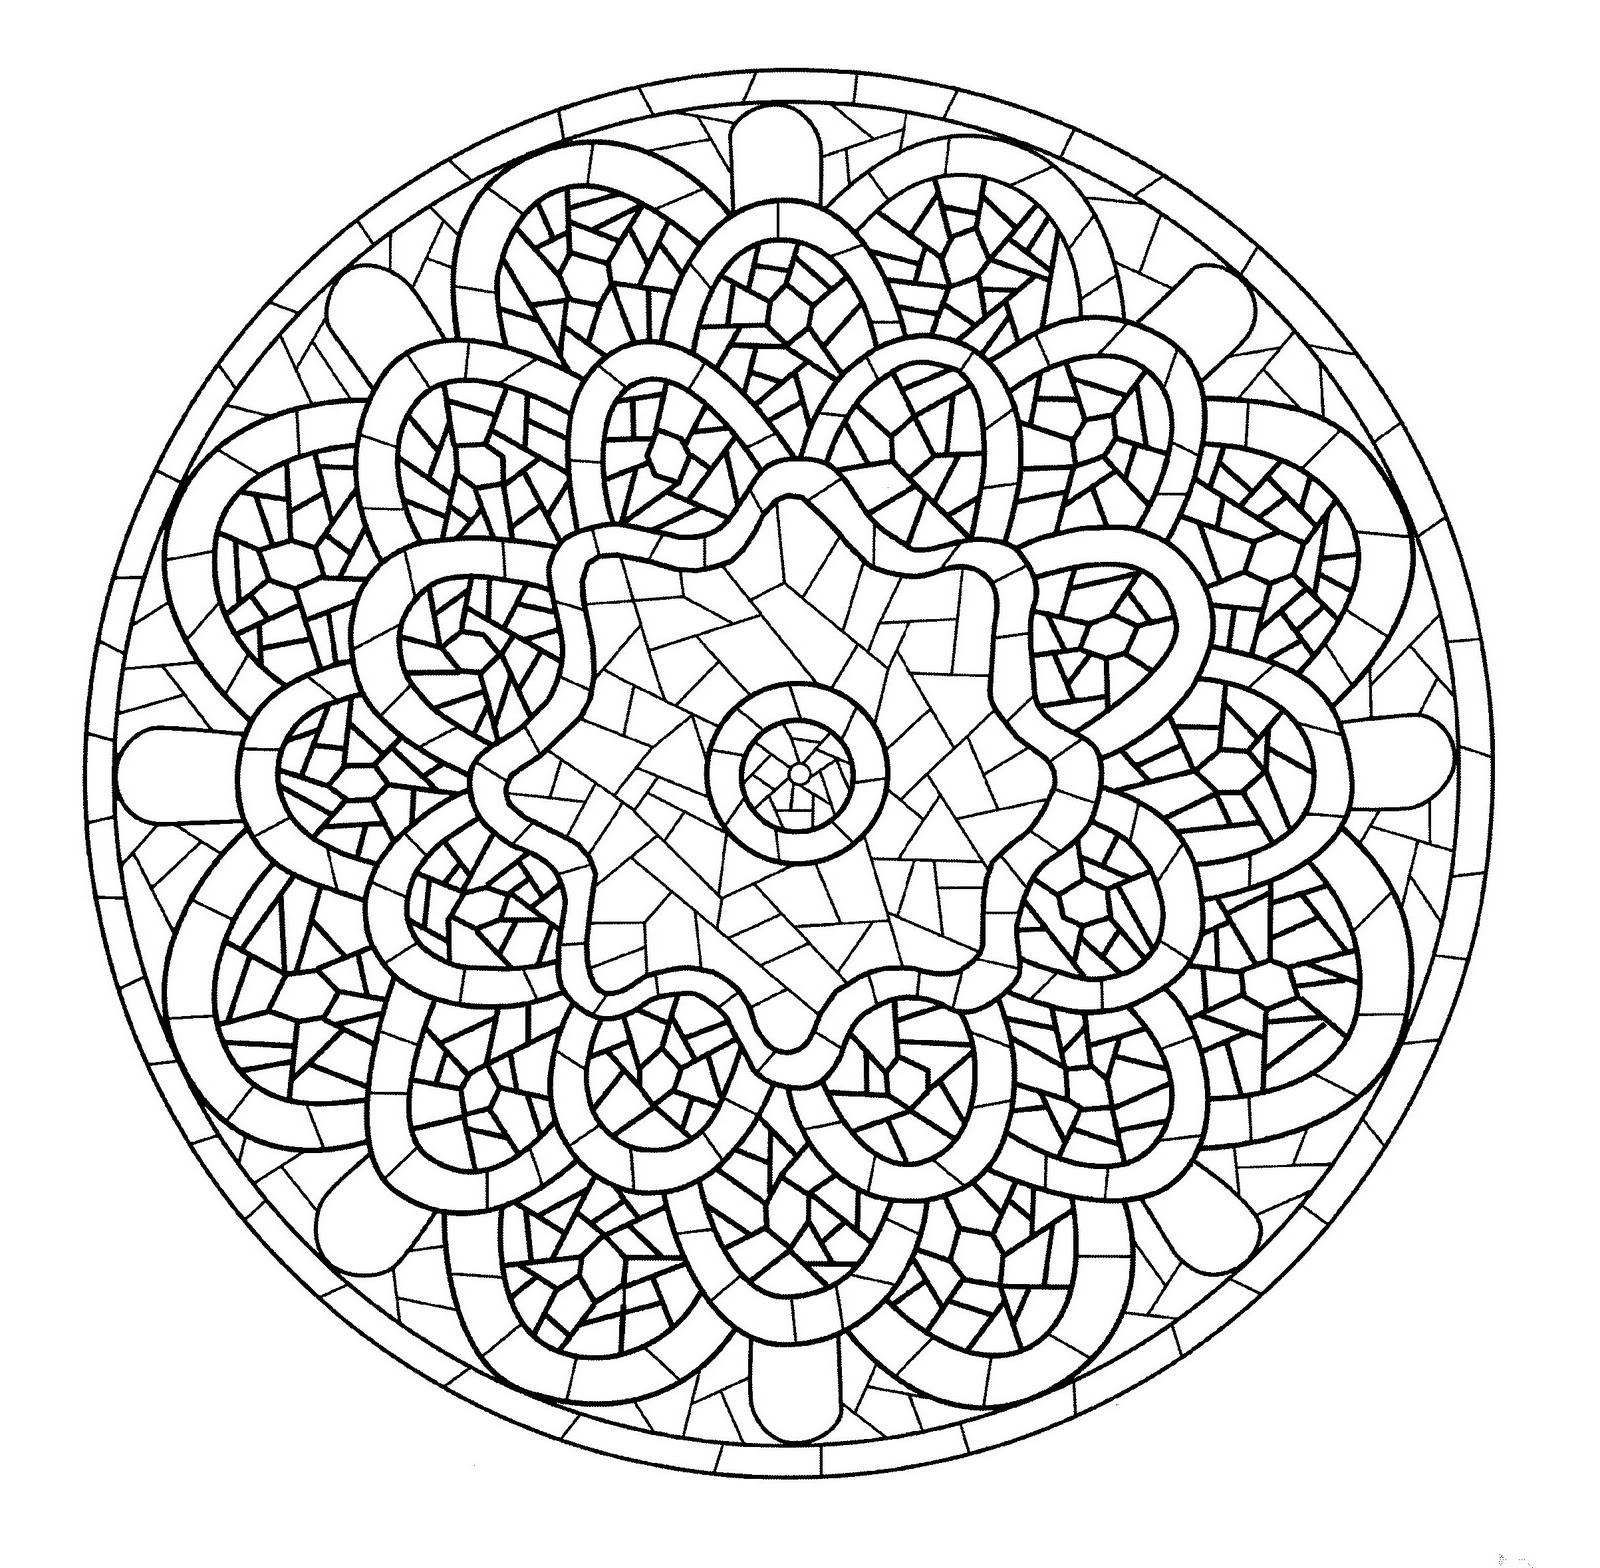 Mandala template looking like a stained glass